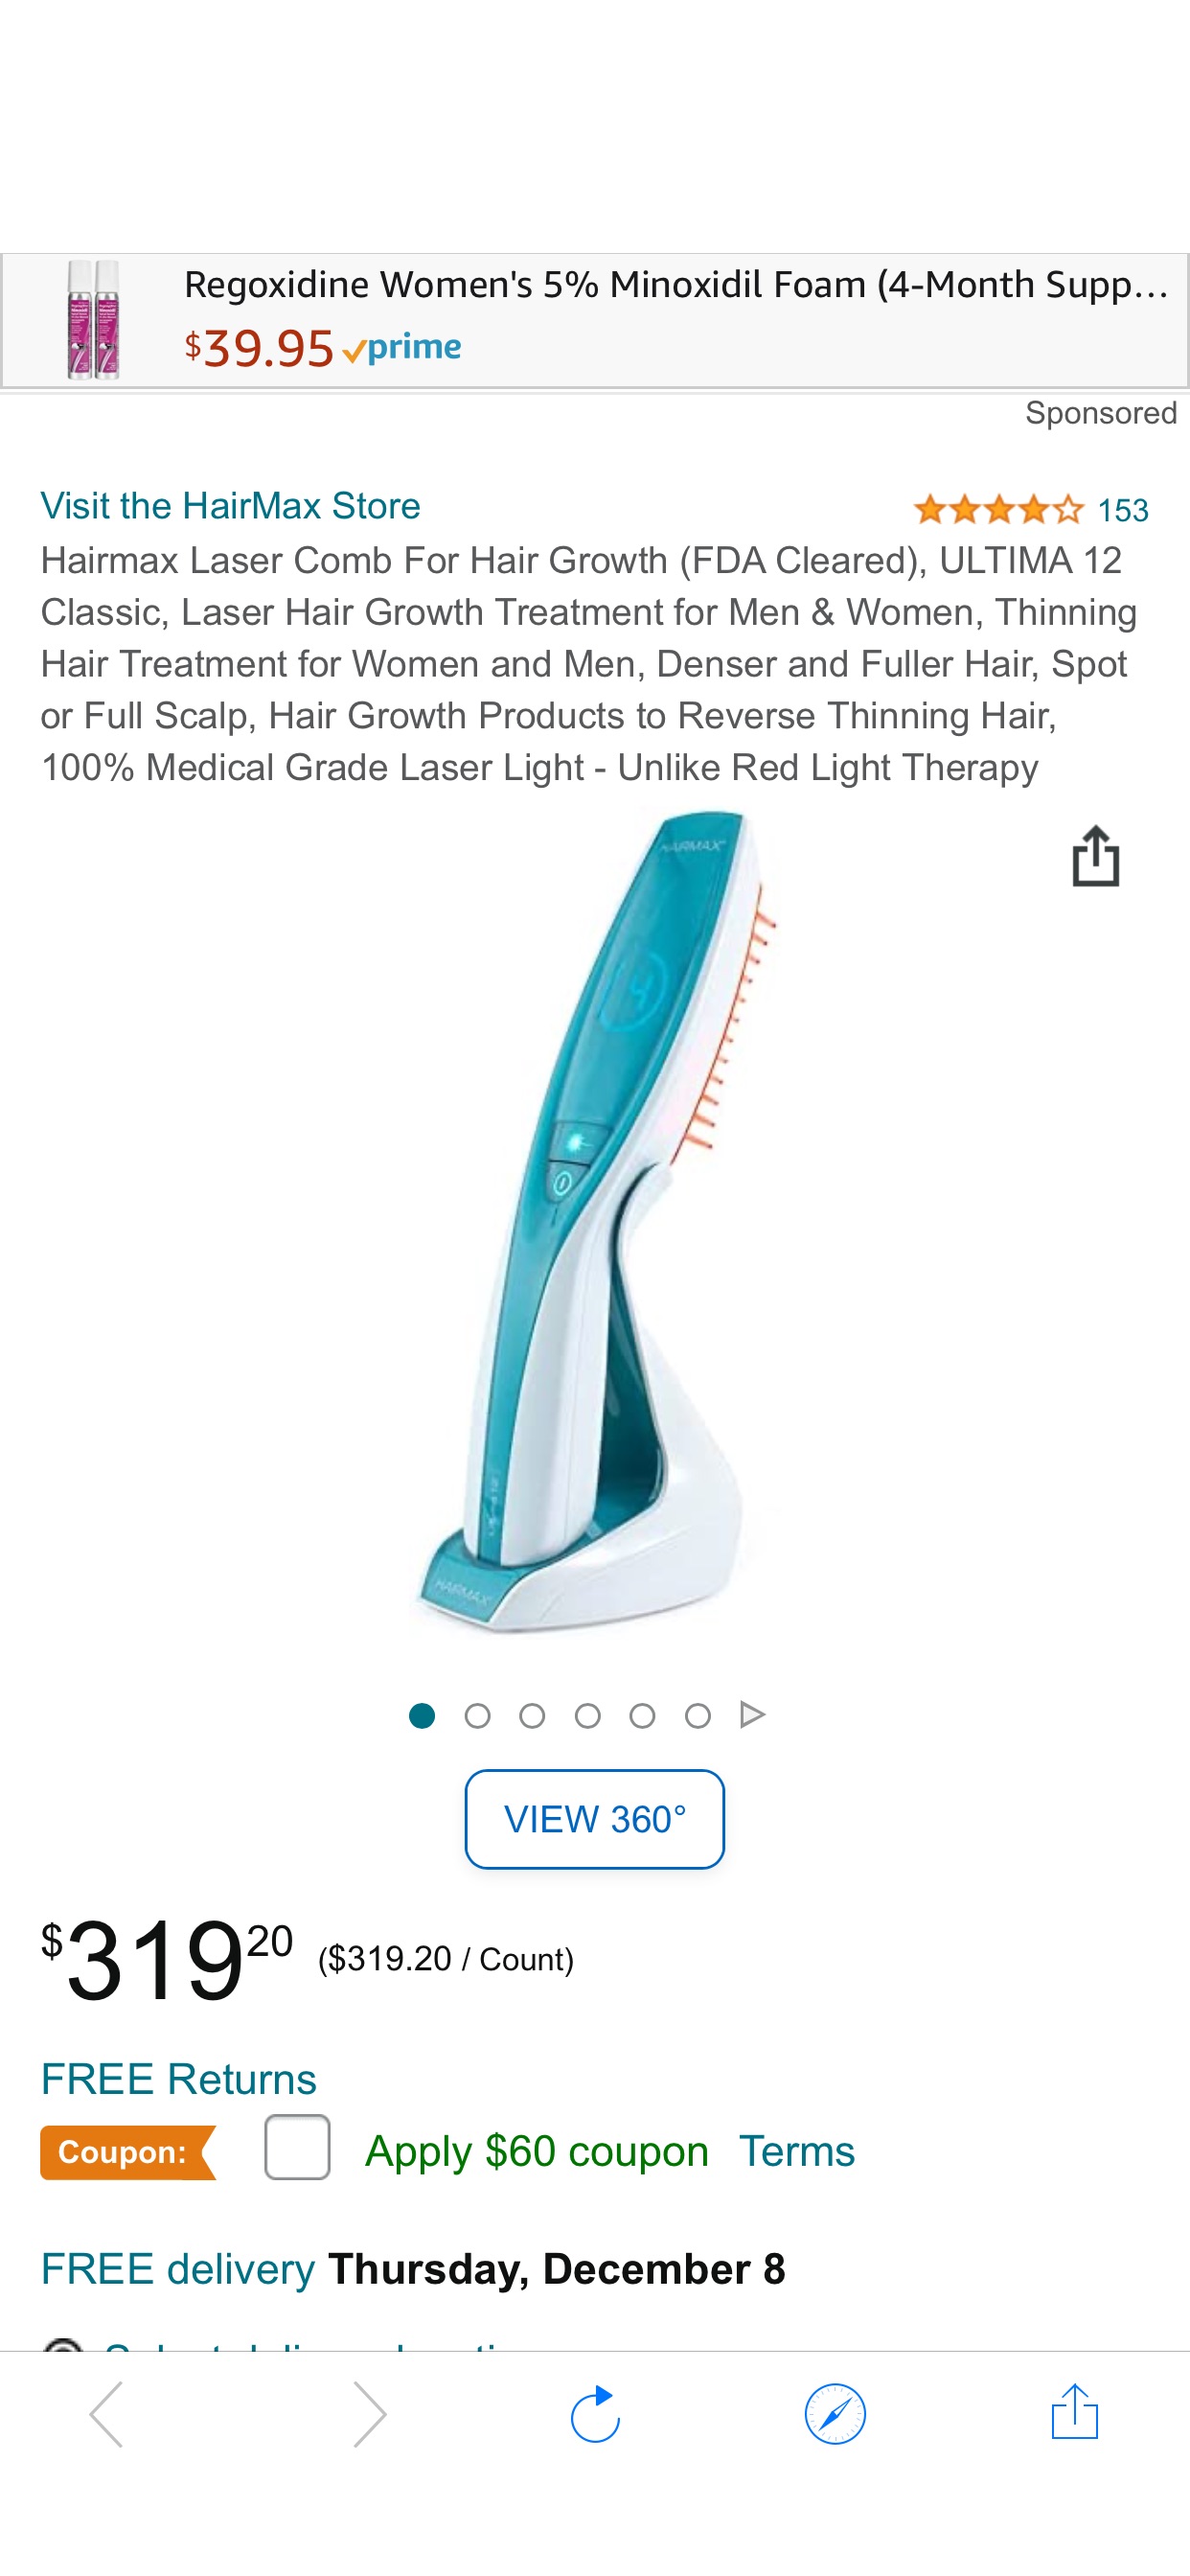 Amazon.com: Hairmax Laser Comb For Hair Growth (FDA Cleared), ULTIMA 12 Classic, Laser Hair Growth Treatment for Men & Women